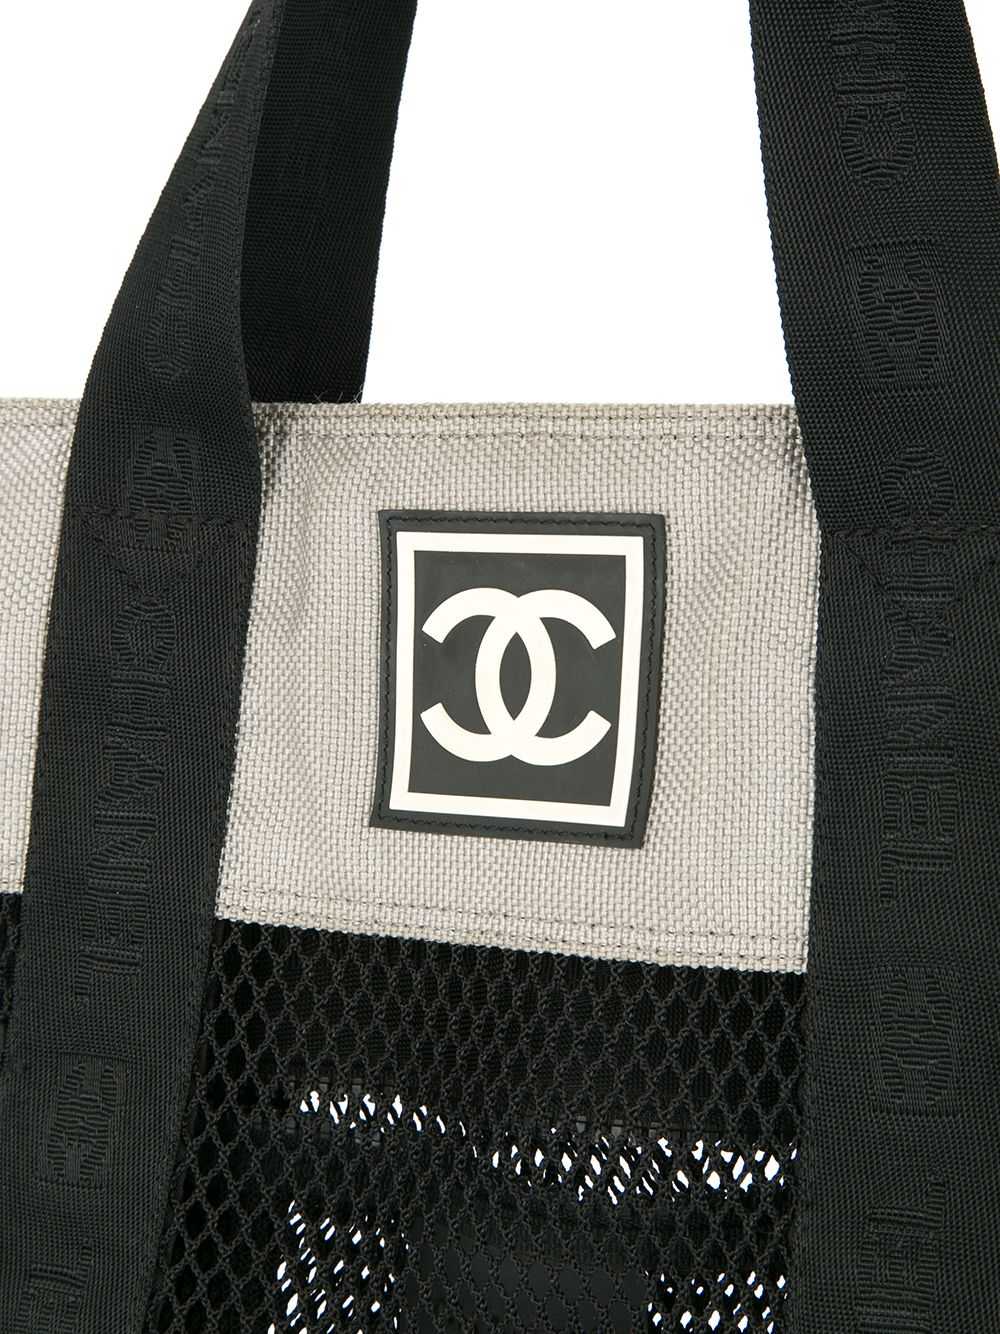 CHANEL Pre-Owned Sports Line shopping bag - Black - image 4